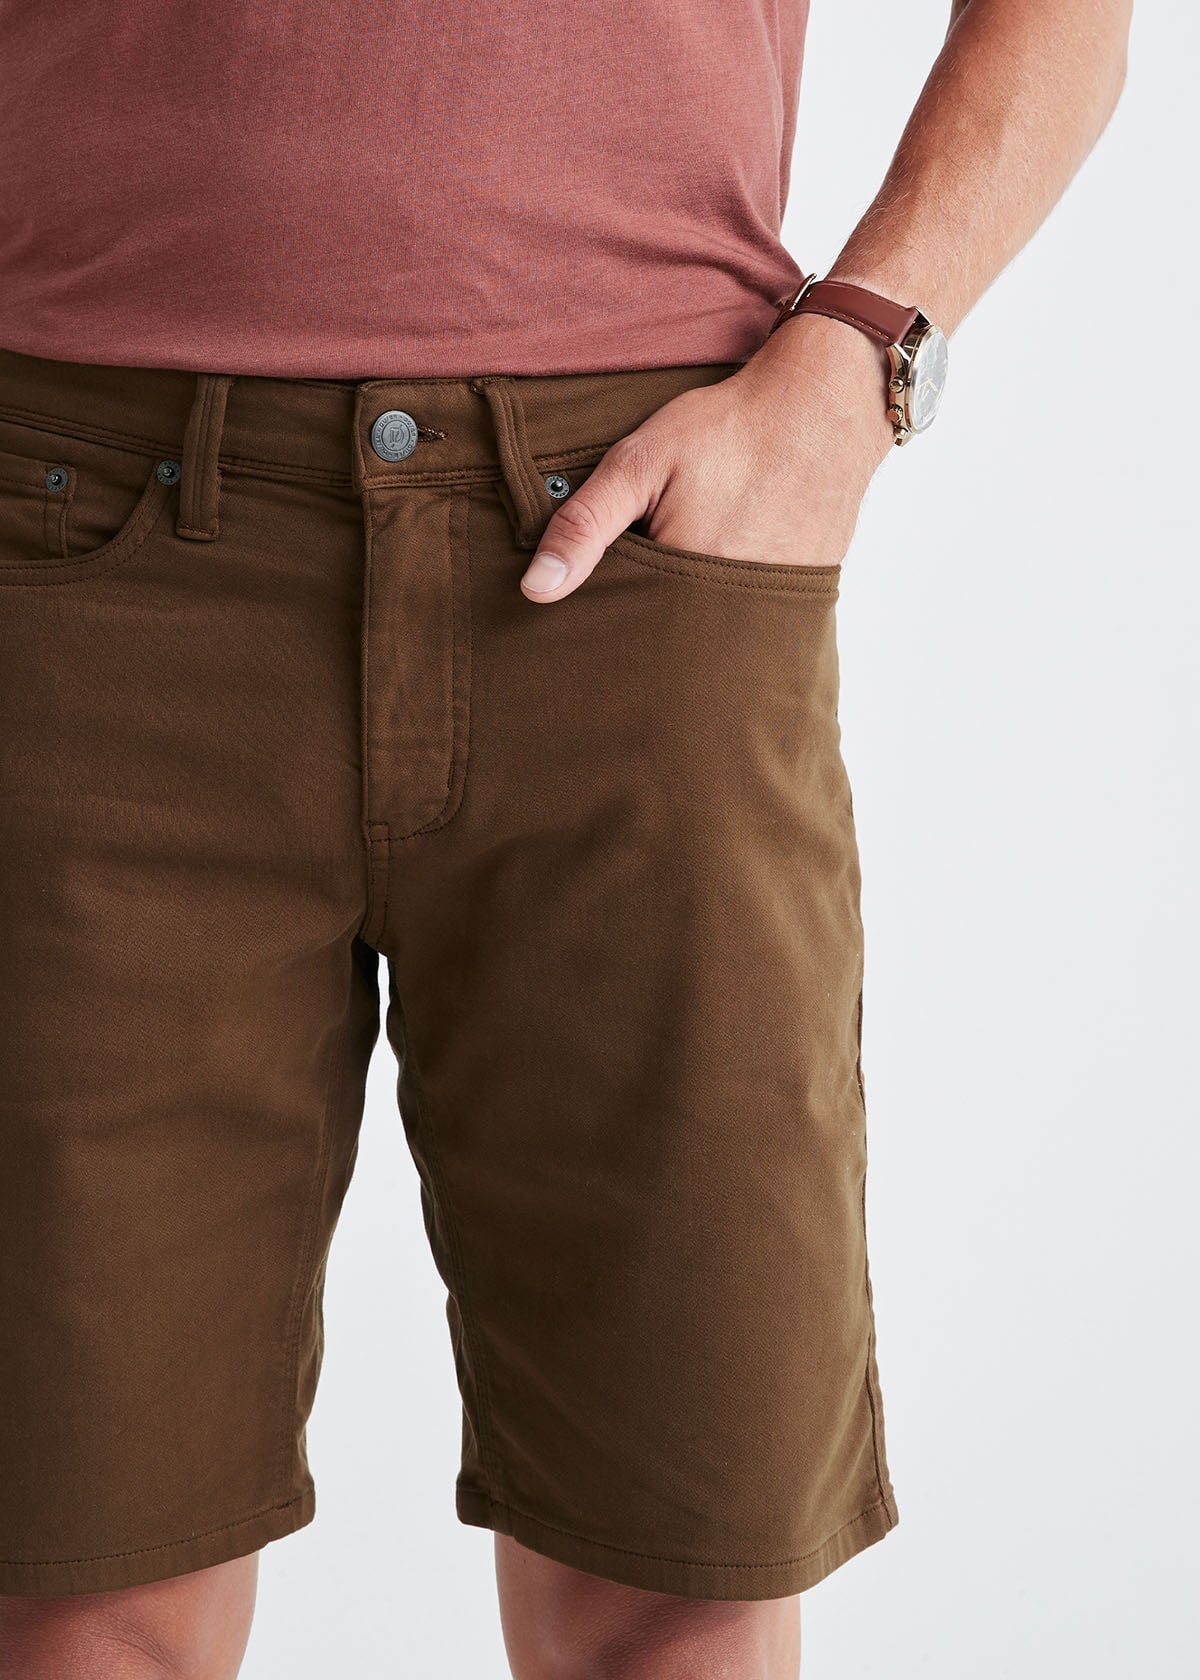 men's brown relaxed fit performance short front waistband detail